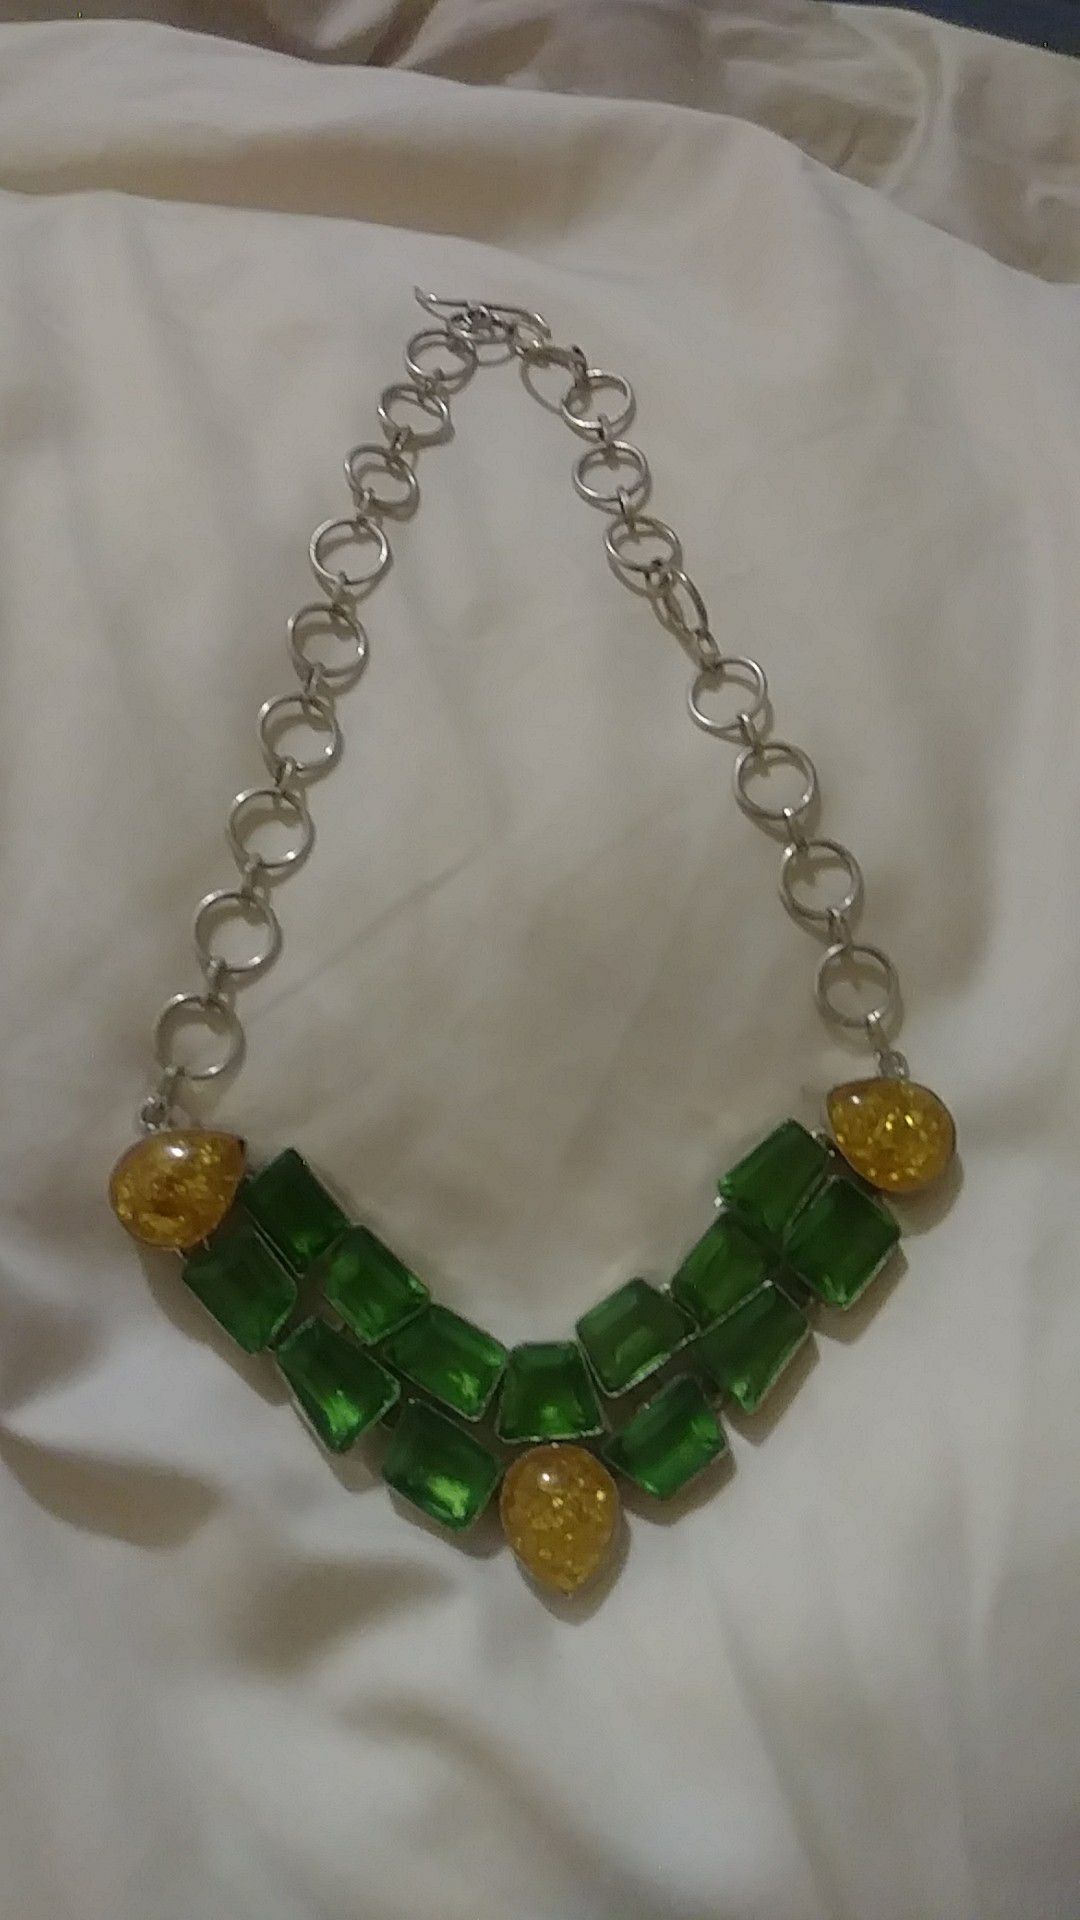 Sterling silver one of a kind artisan crafted adnustable gemstone necklace bezel set are cut peridots with 3 large pears of natural baltic amber, 22"